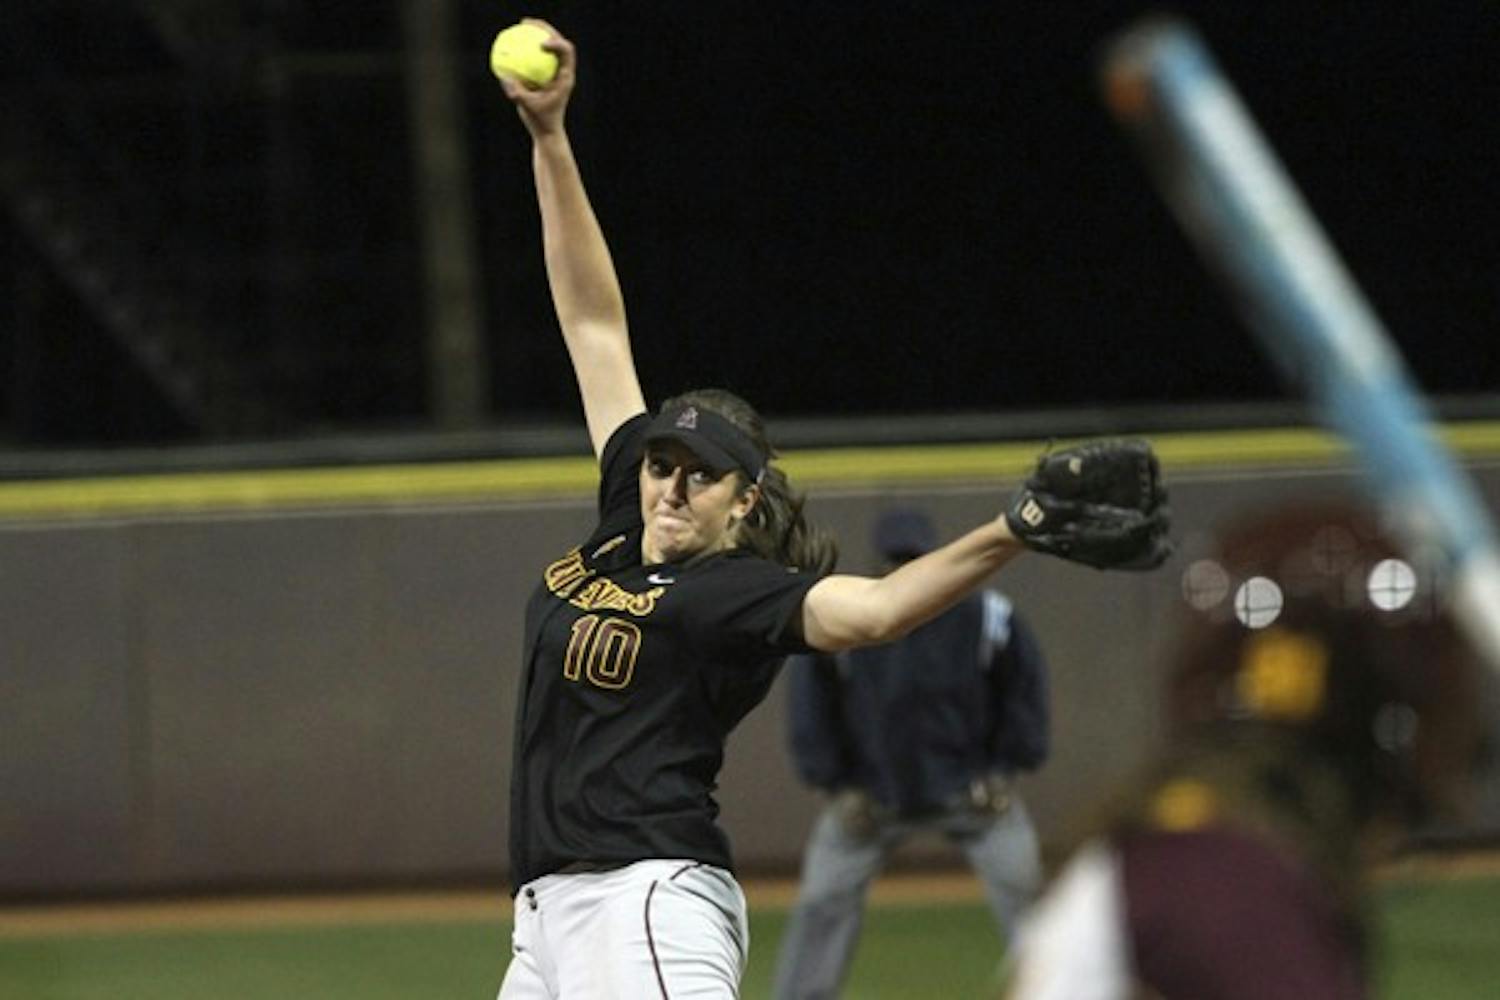 No contest: ASU redshirt freshman Mackenzie Popescue hurls a pitch from the circle during the Sun Devils’ 11-3 run-rule victory over UC Santa Barbara on Saturday. ASU completed the series sweep with a 9-1 win on Sunday. (Photo by Michael Arellano)